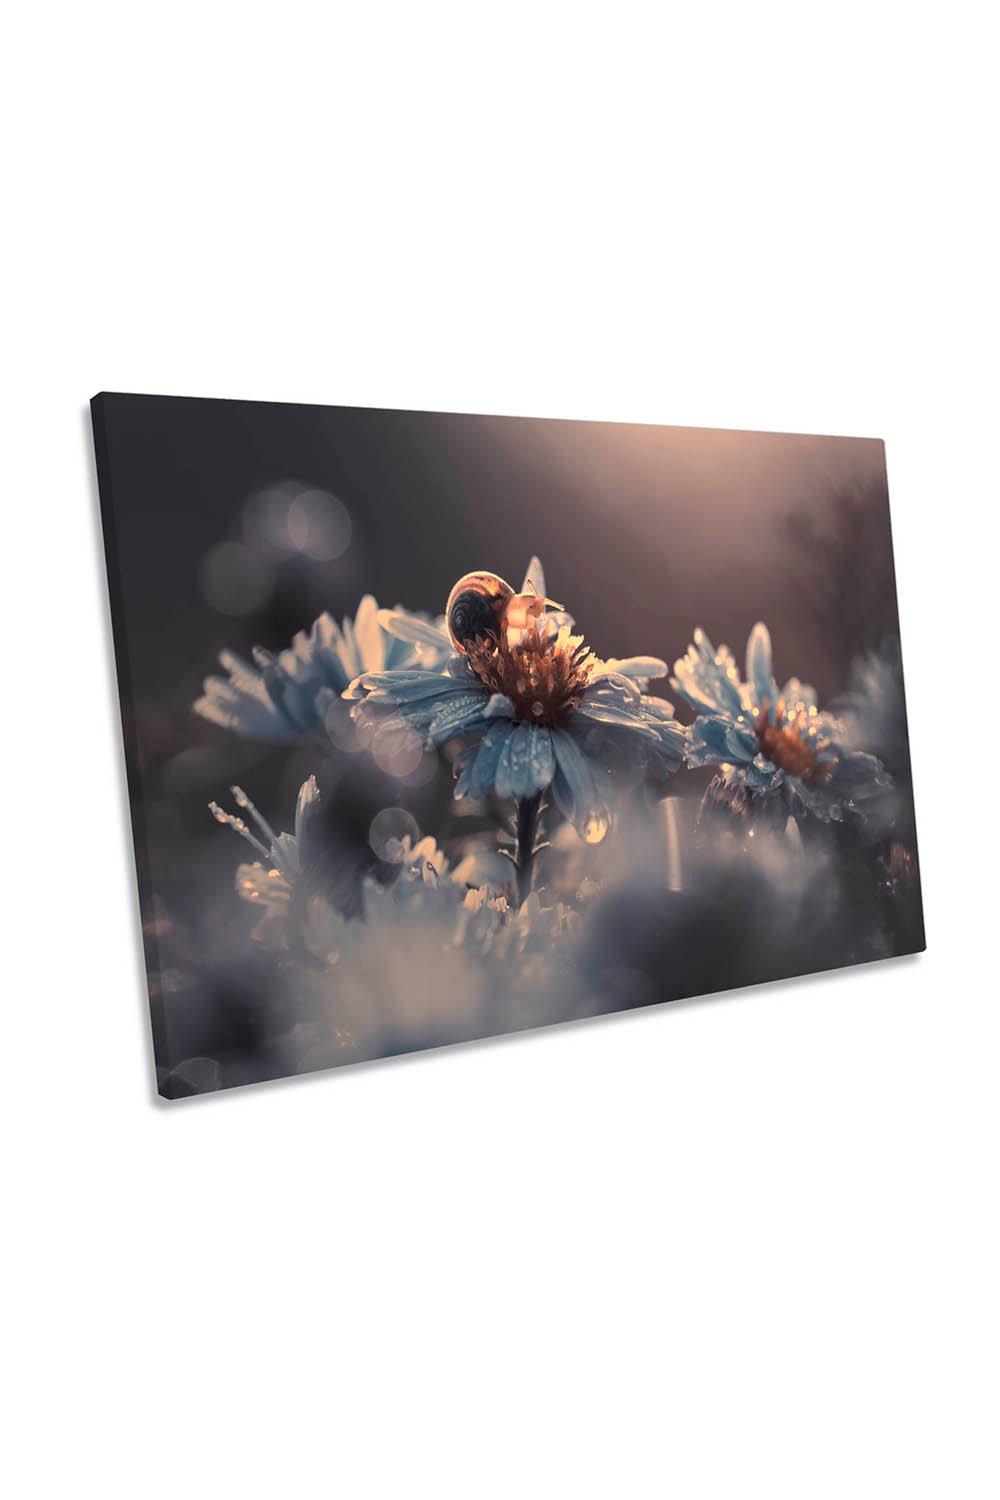 Riding Zone Floral Flowers Petal Canvas Wall Art Picture Print